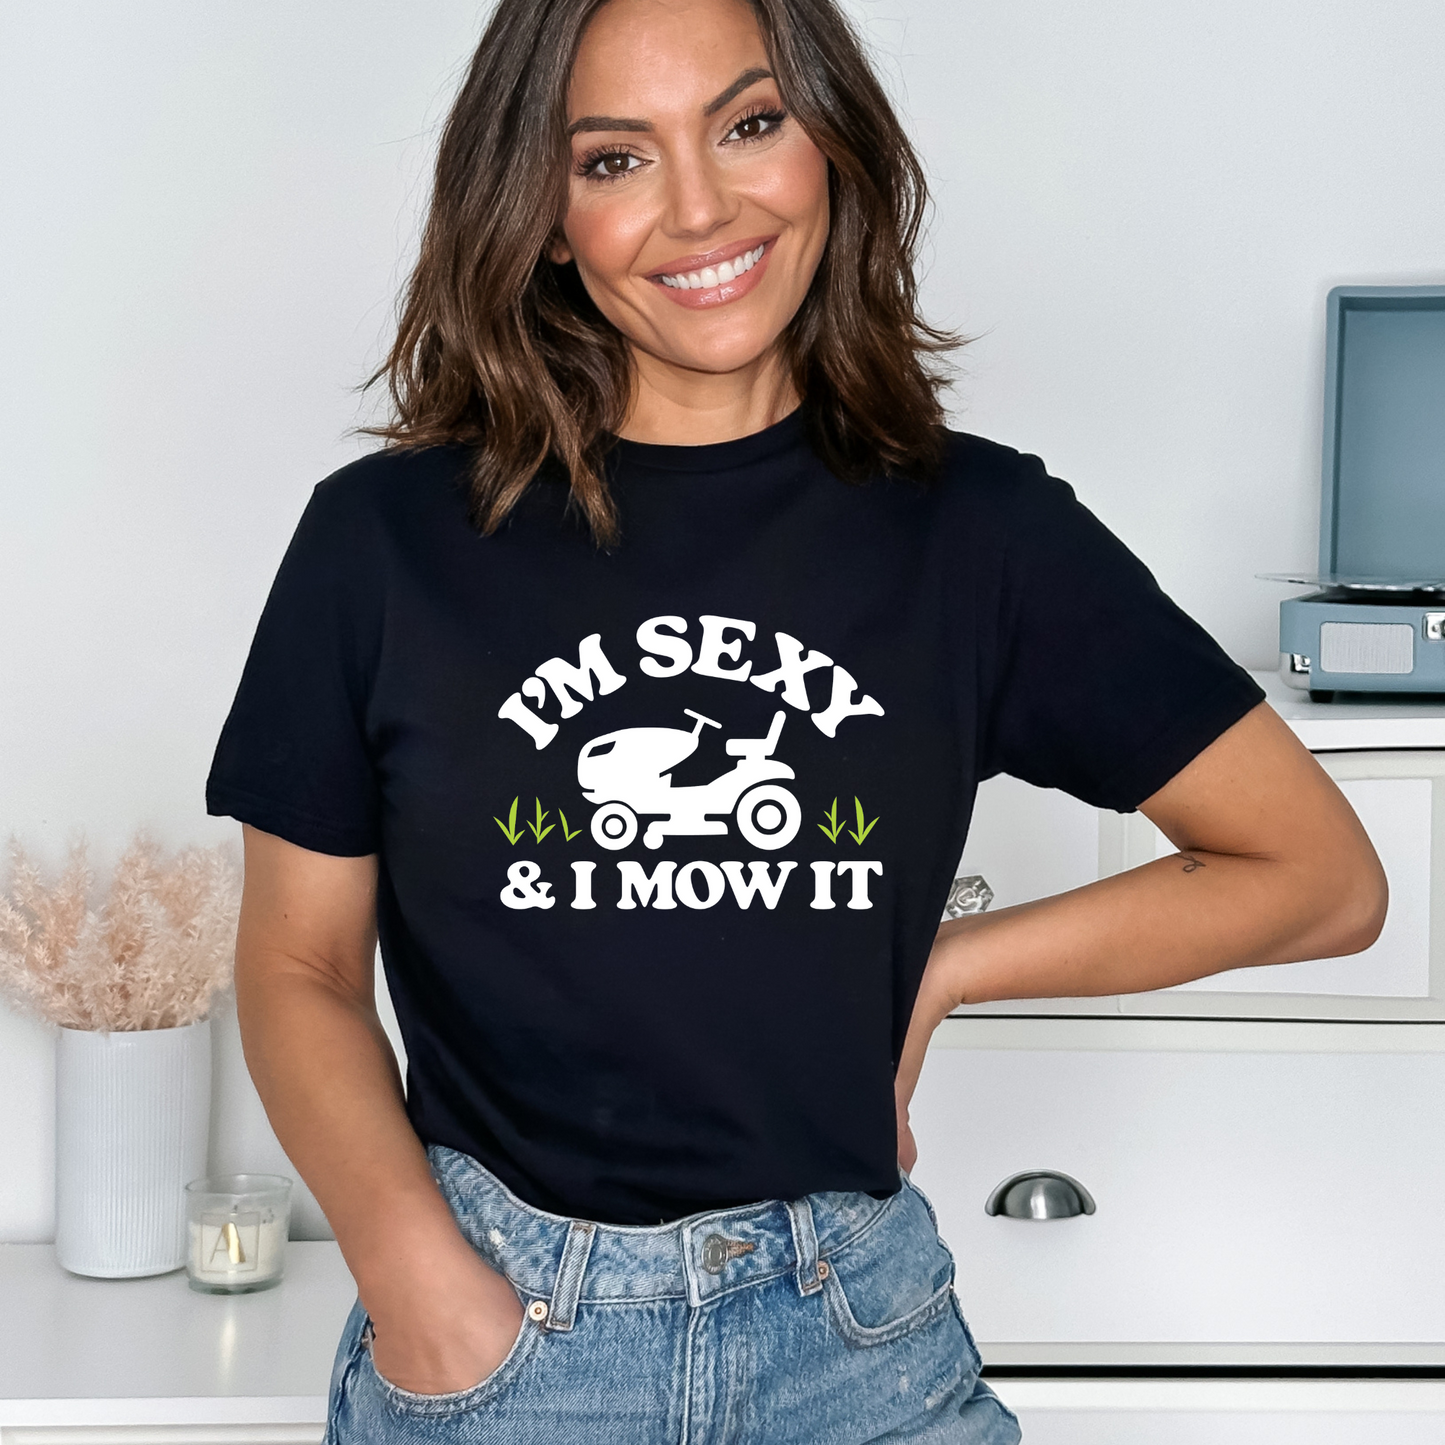 I'm sexy and I mow it - Adult Unisex Soft T-shirt